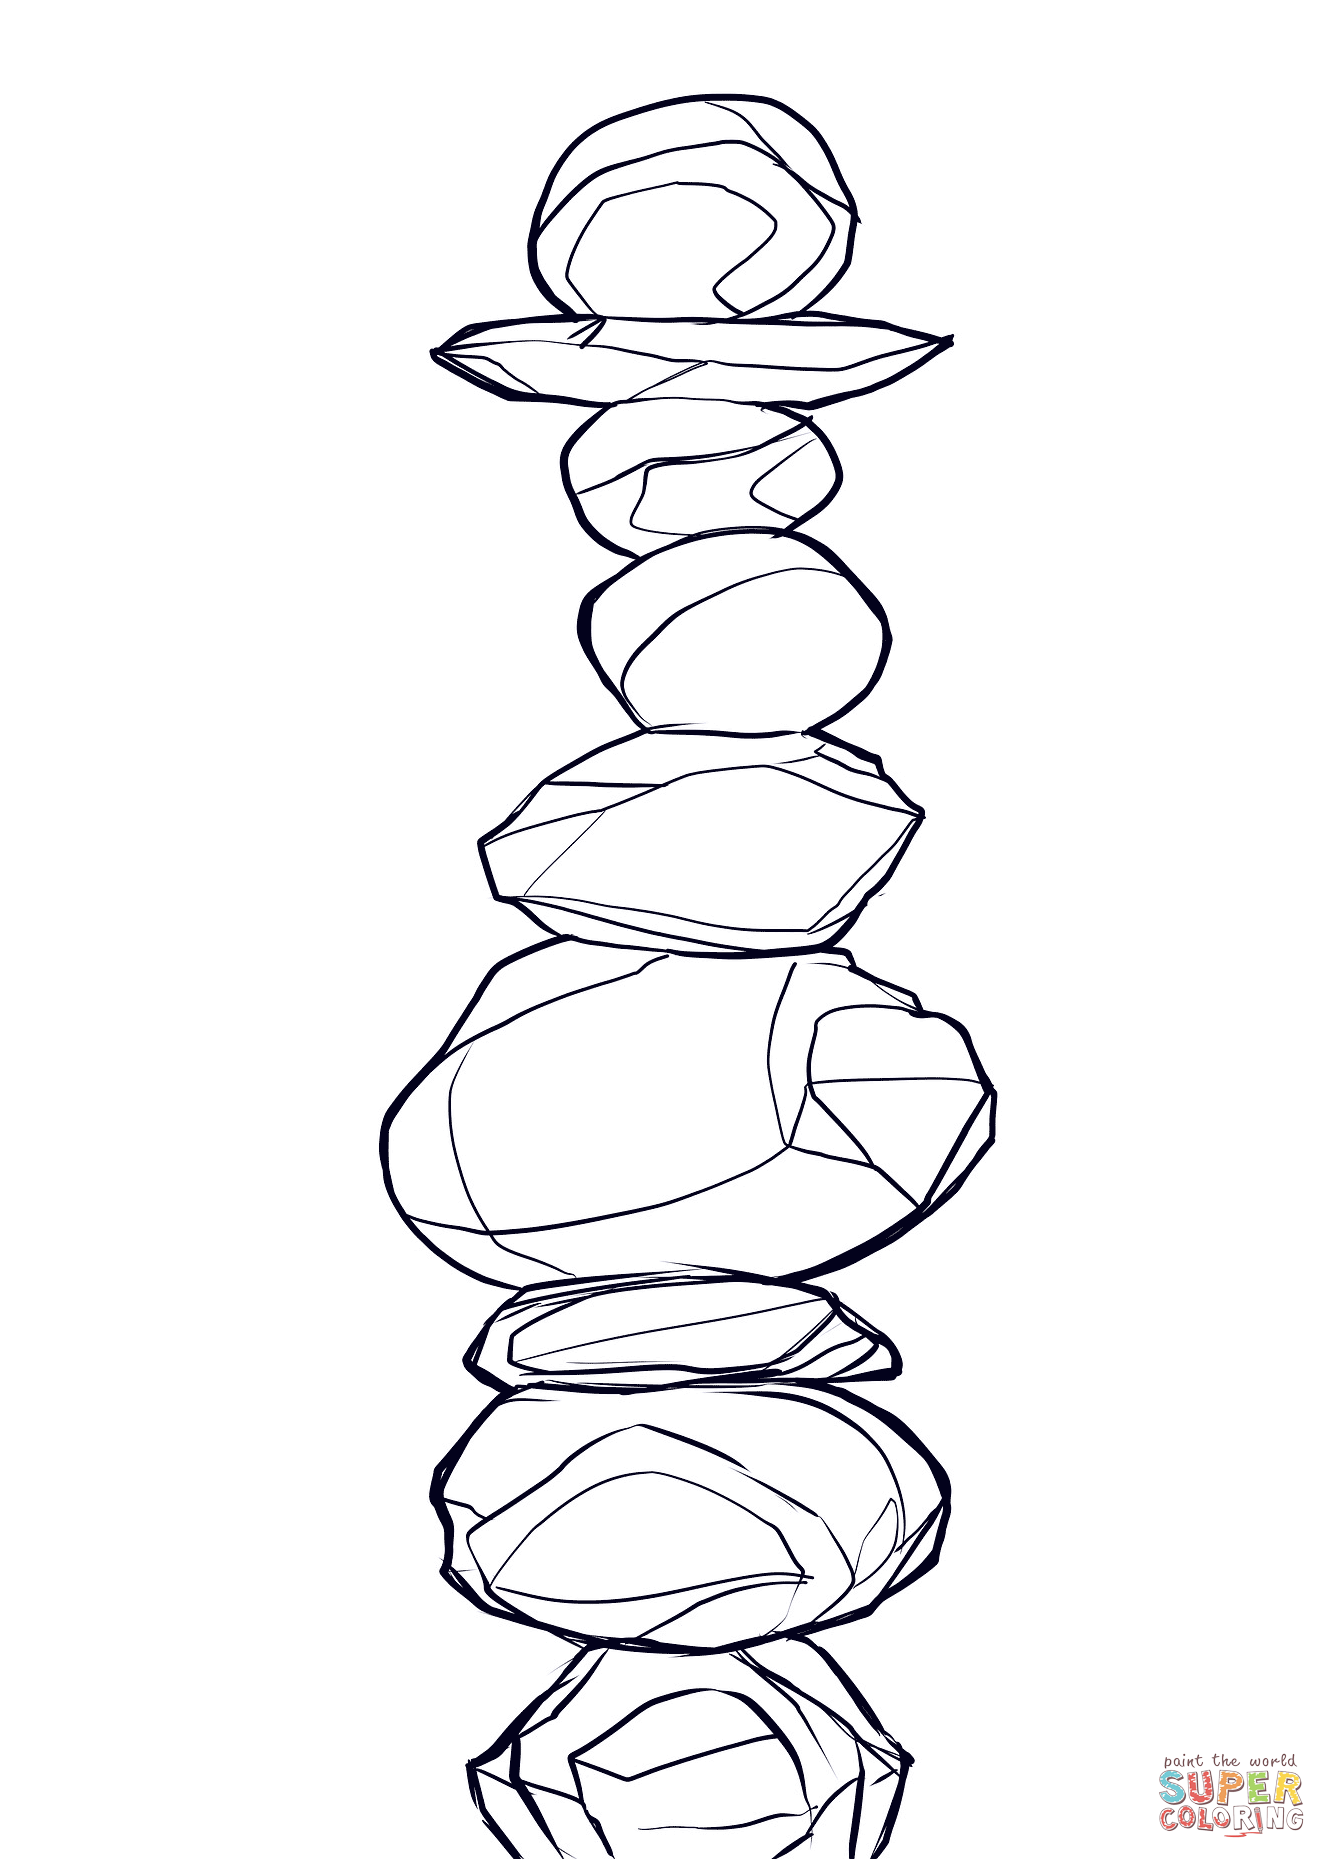 Balanced rocks coloring page free printable coloring pages